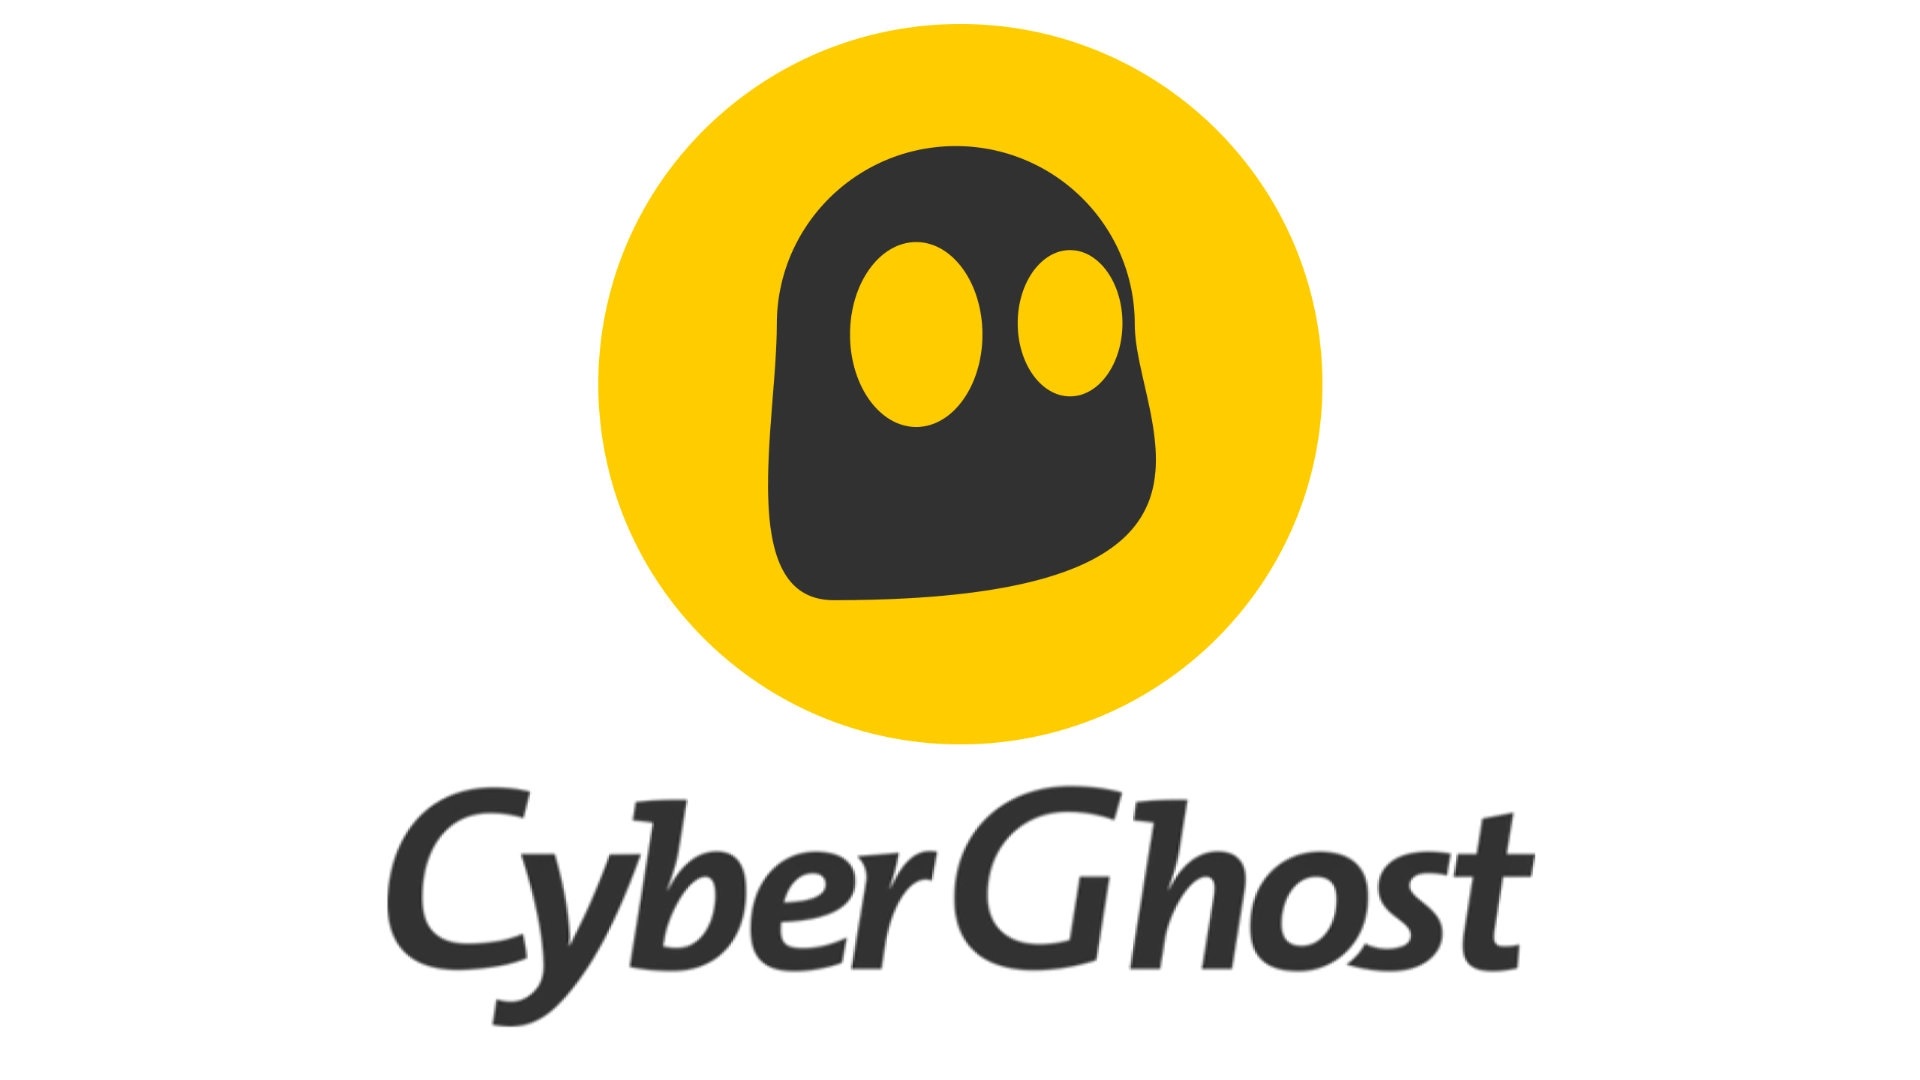 The best VPN for gaming: The Cyberghost logo on a white background.